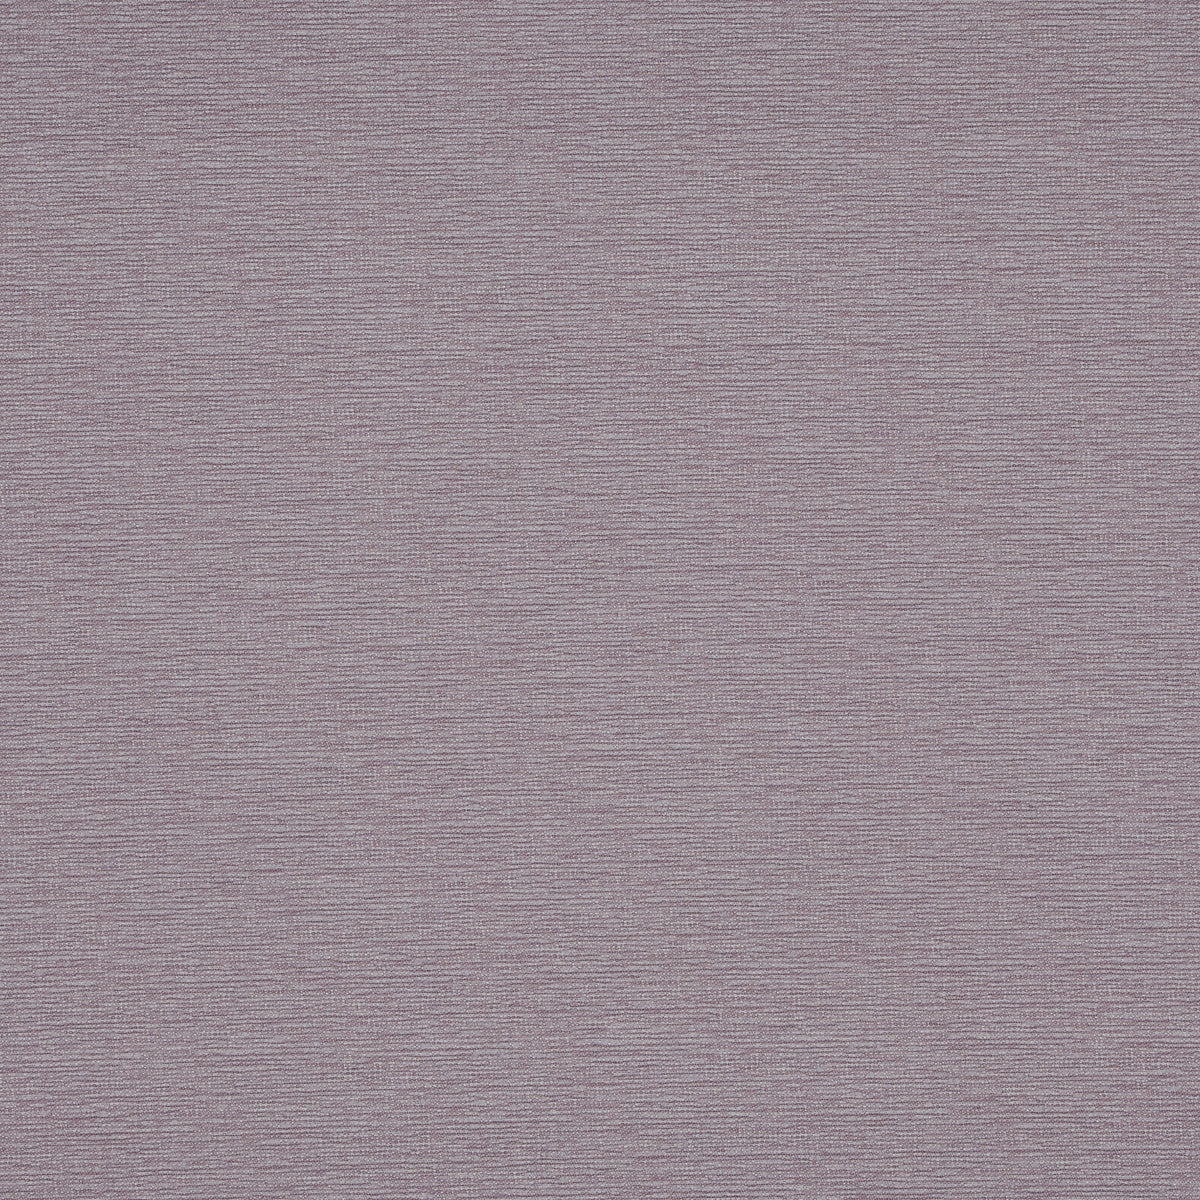 Quentin Mauve Roller Blind